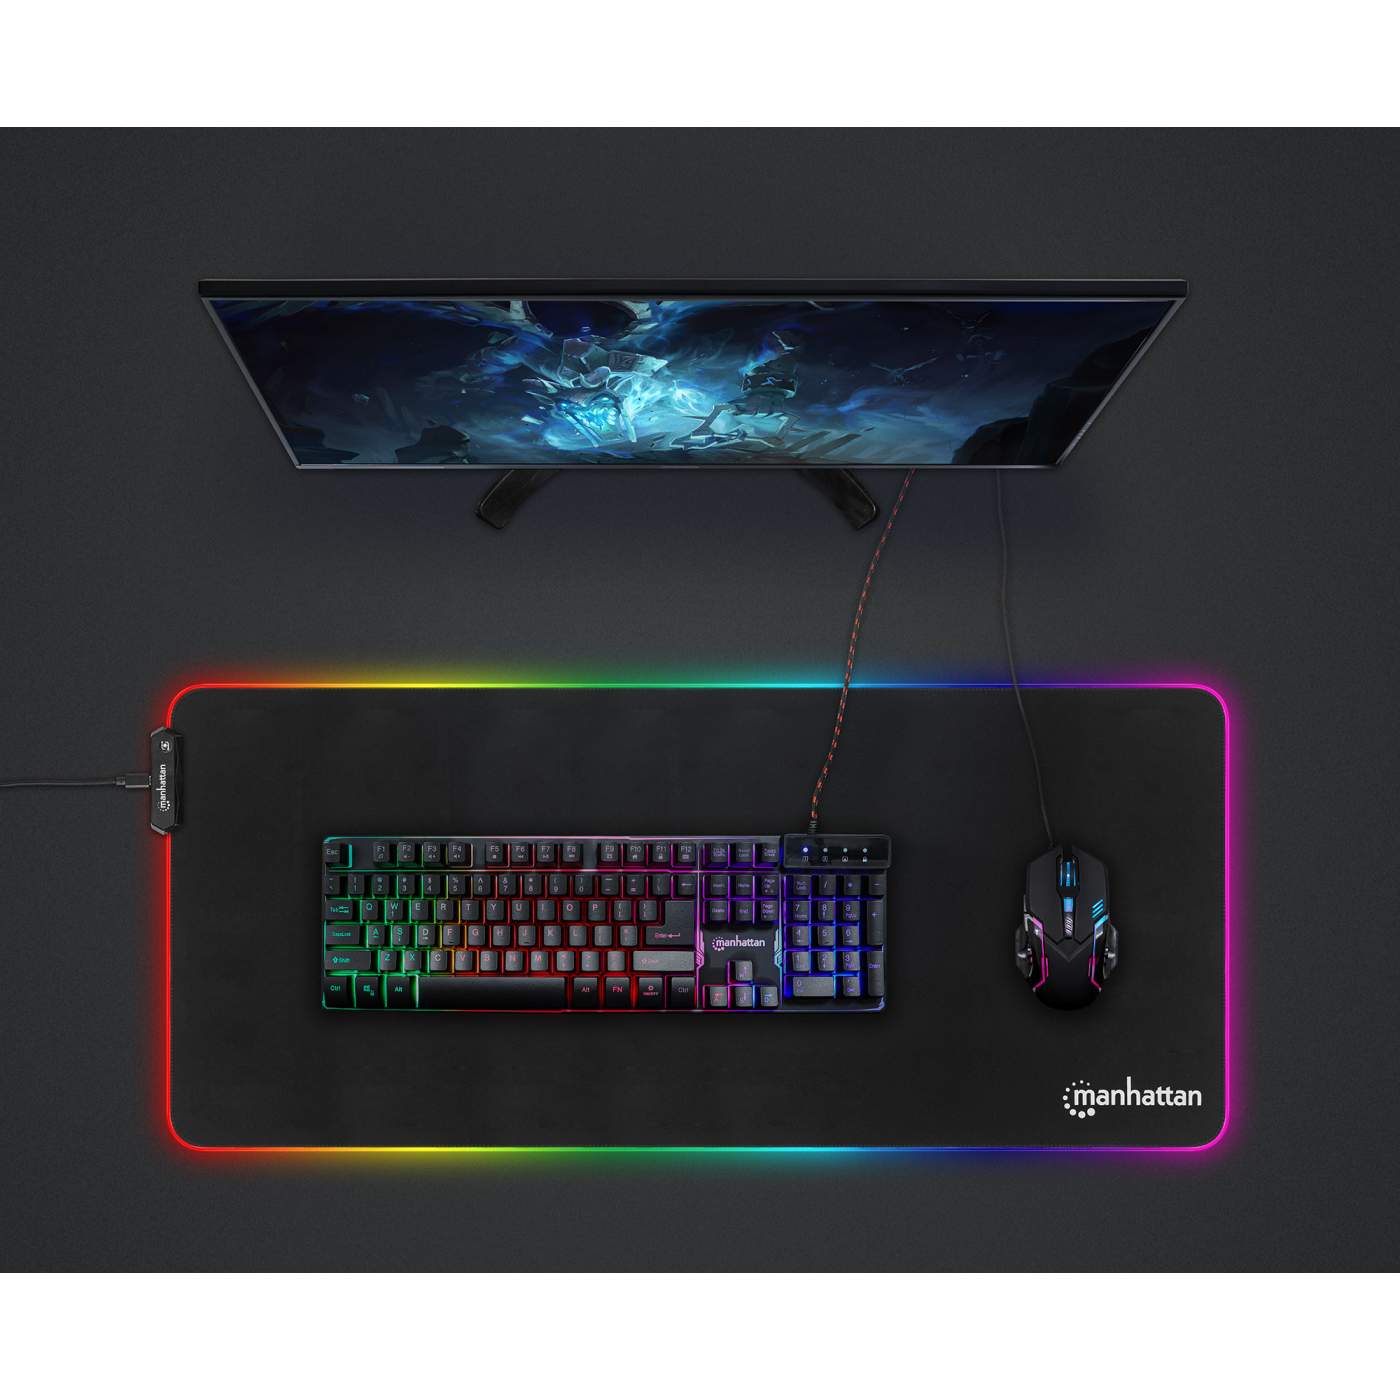 Buy Wholesale China Gaming Extended Xxl Glowing Led Mouse Pad Rgb